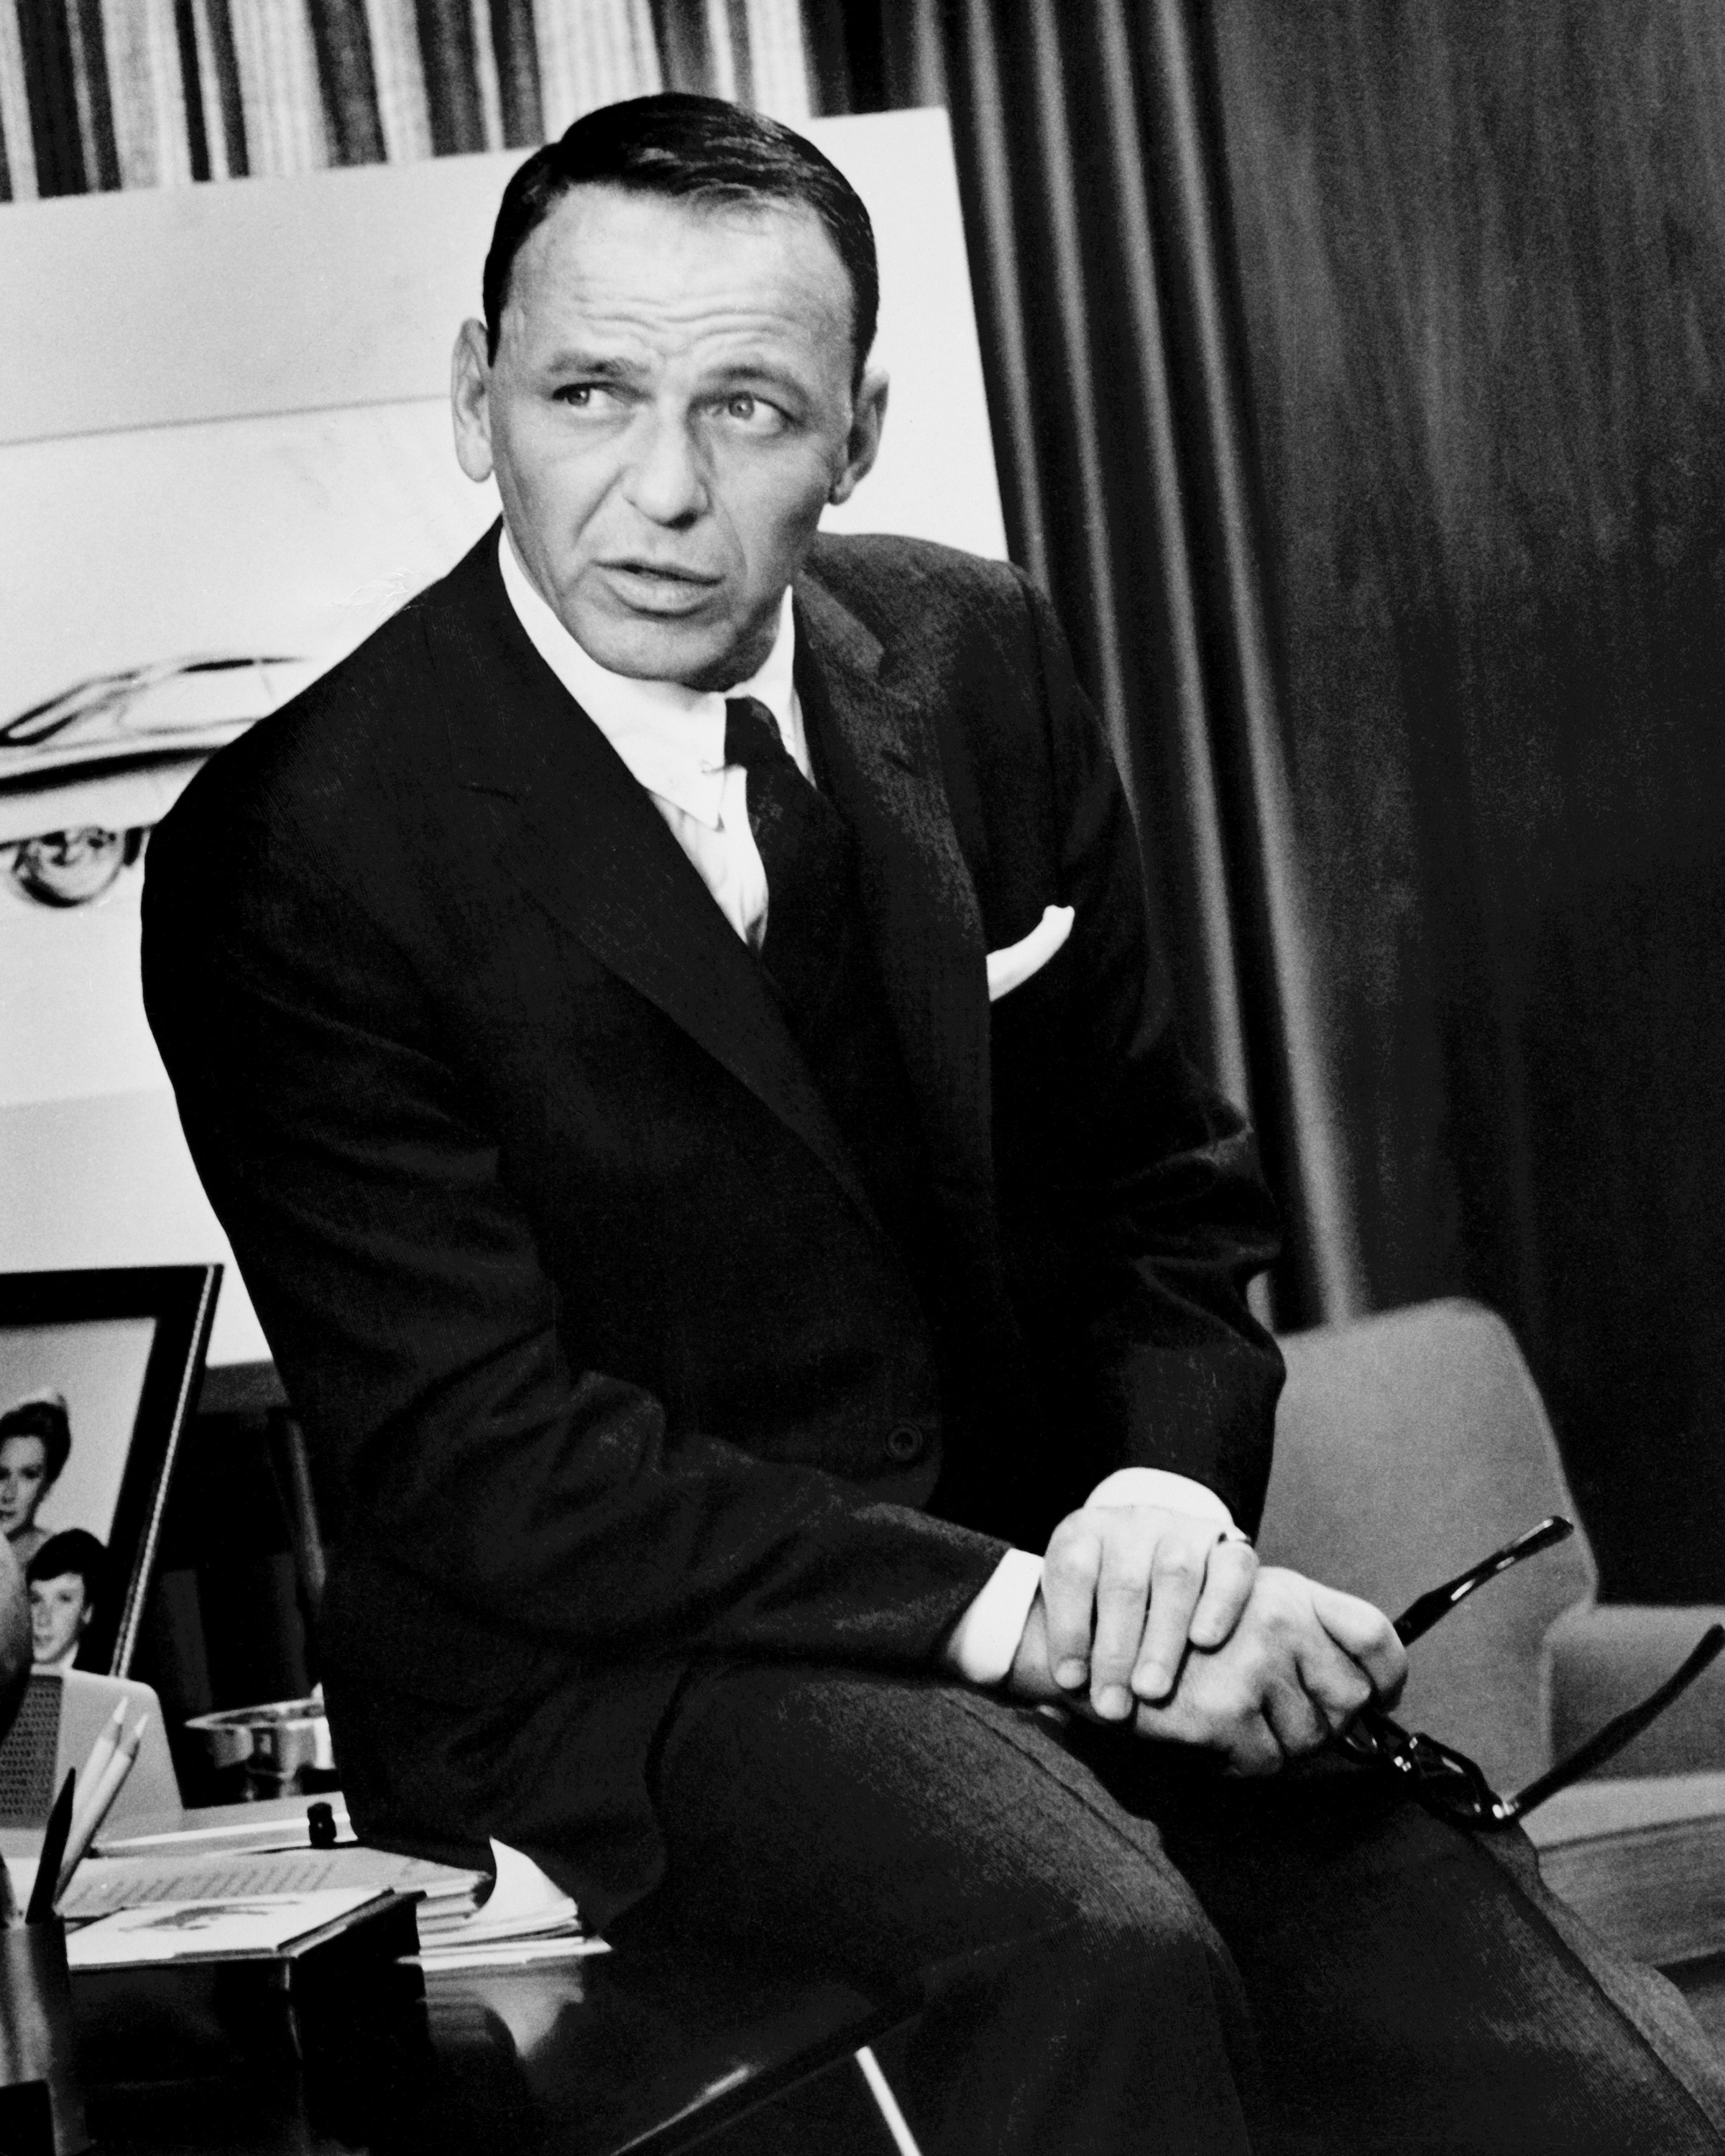 Man in suit seated with crossed legs, leaning forward, against backdrop with framed pictures